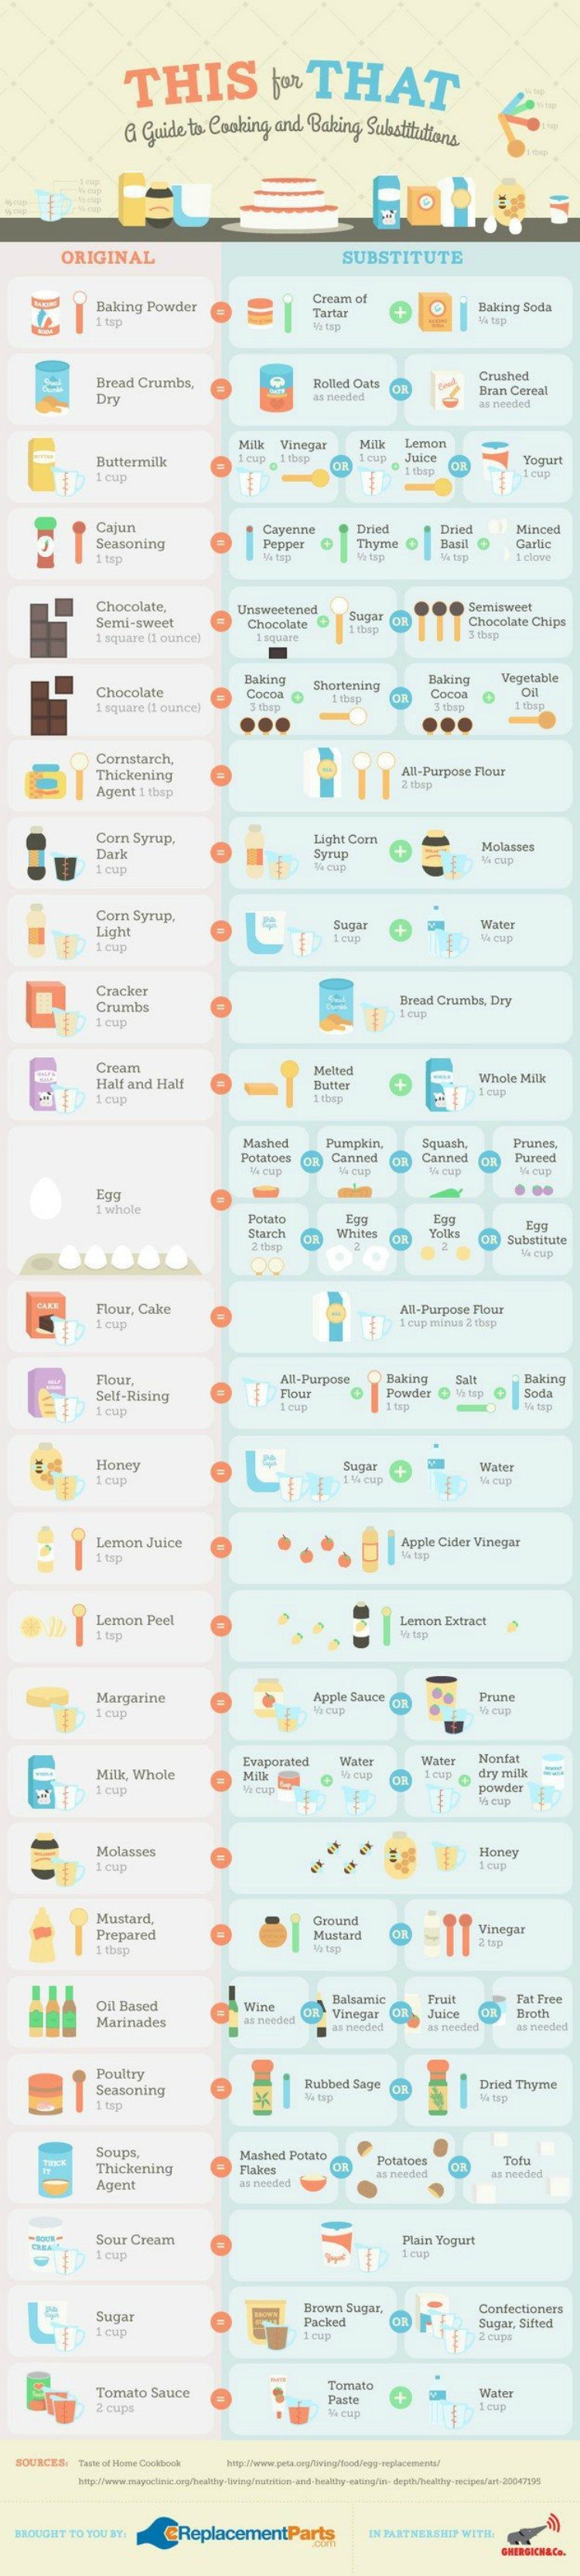 Healthy Substitutions